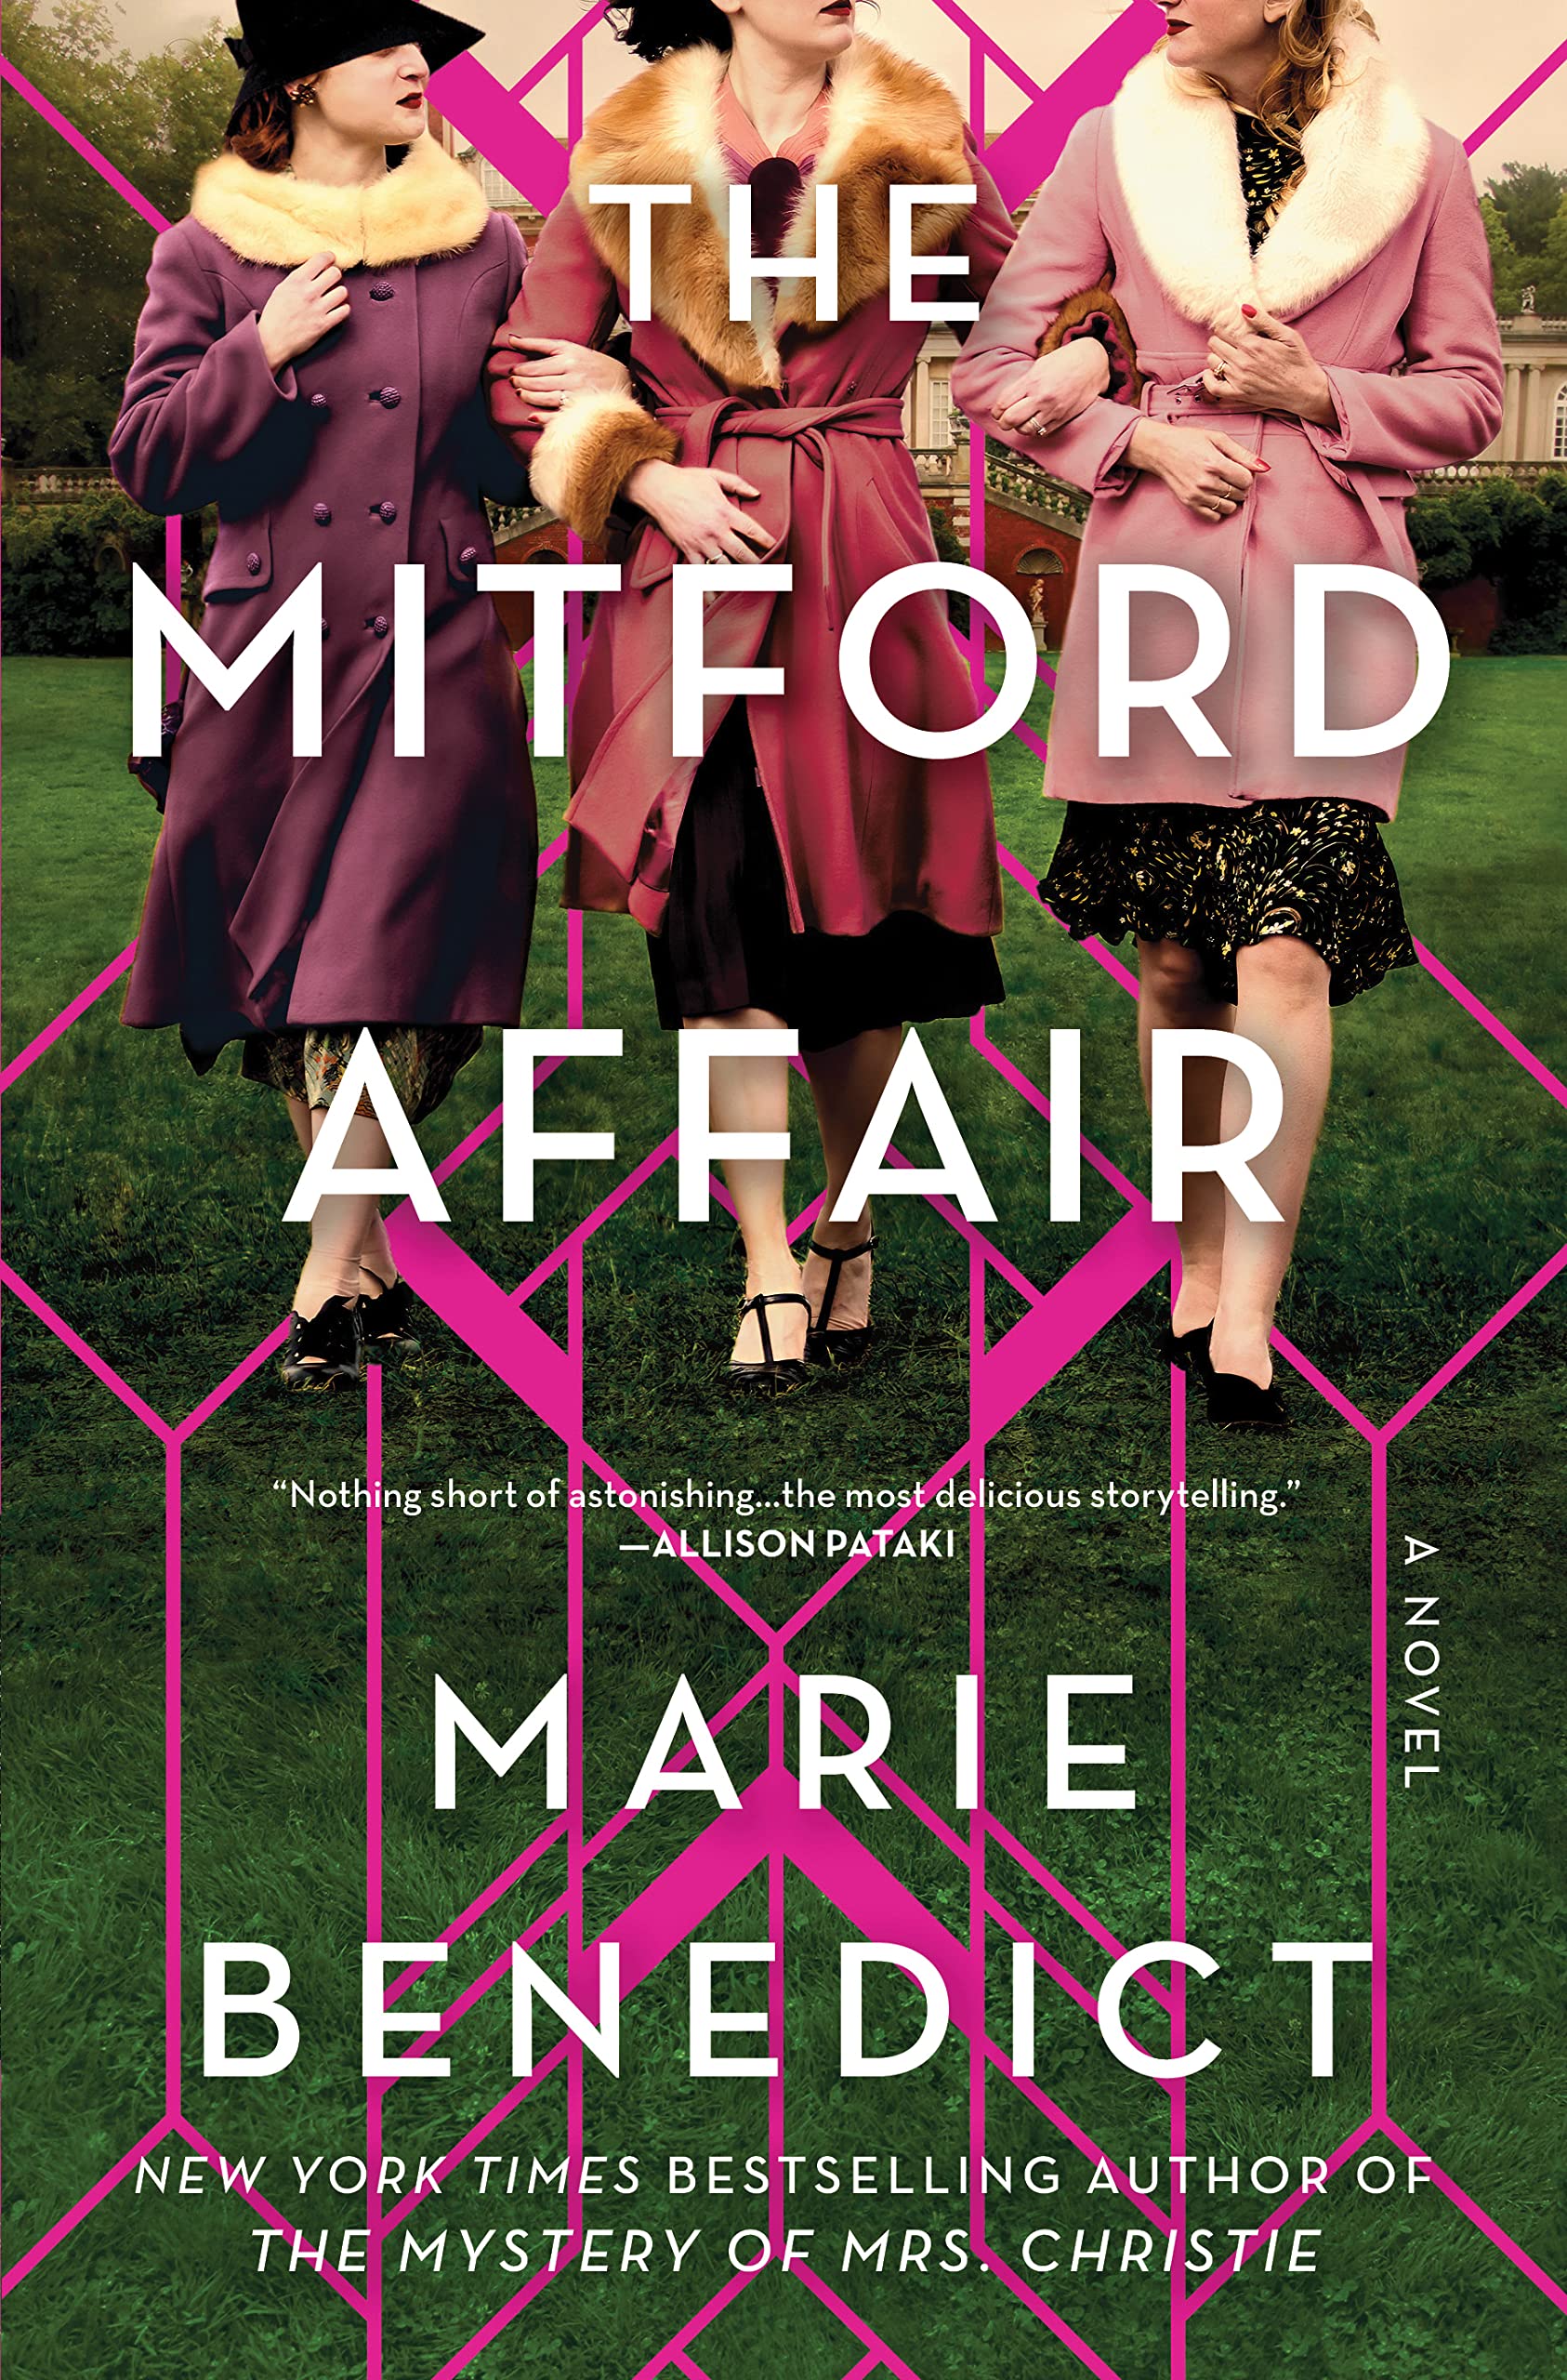 Image for "The Mitford Affair"